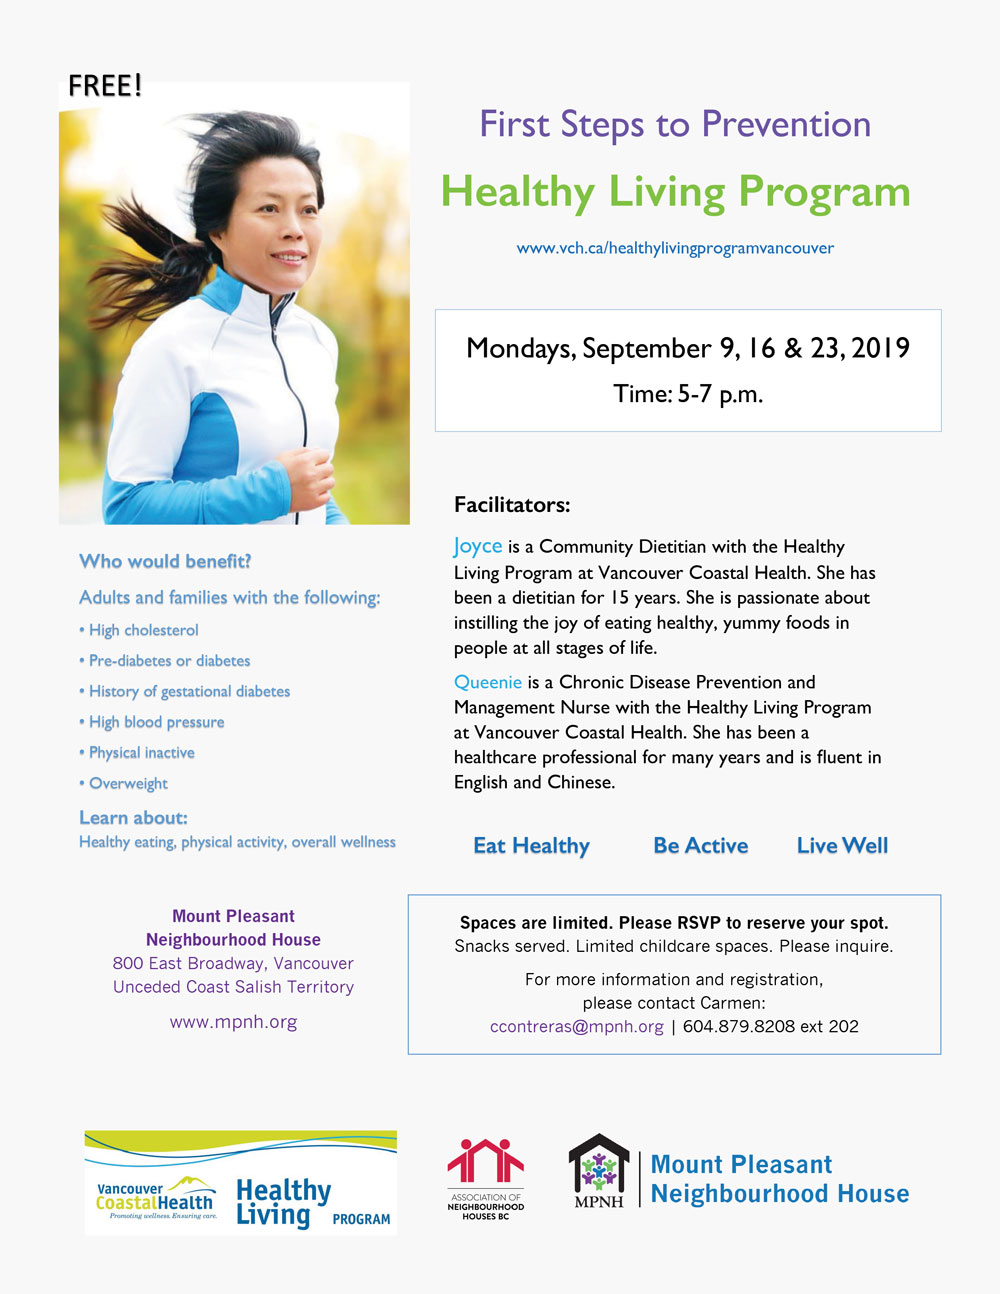 An image of the poster with program details, featuring a photo of a person jogging outdoors.